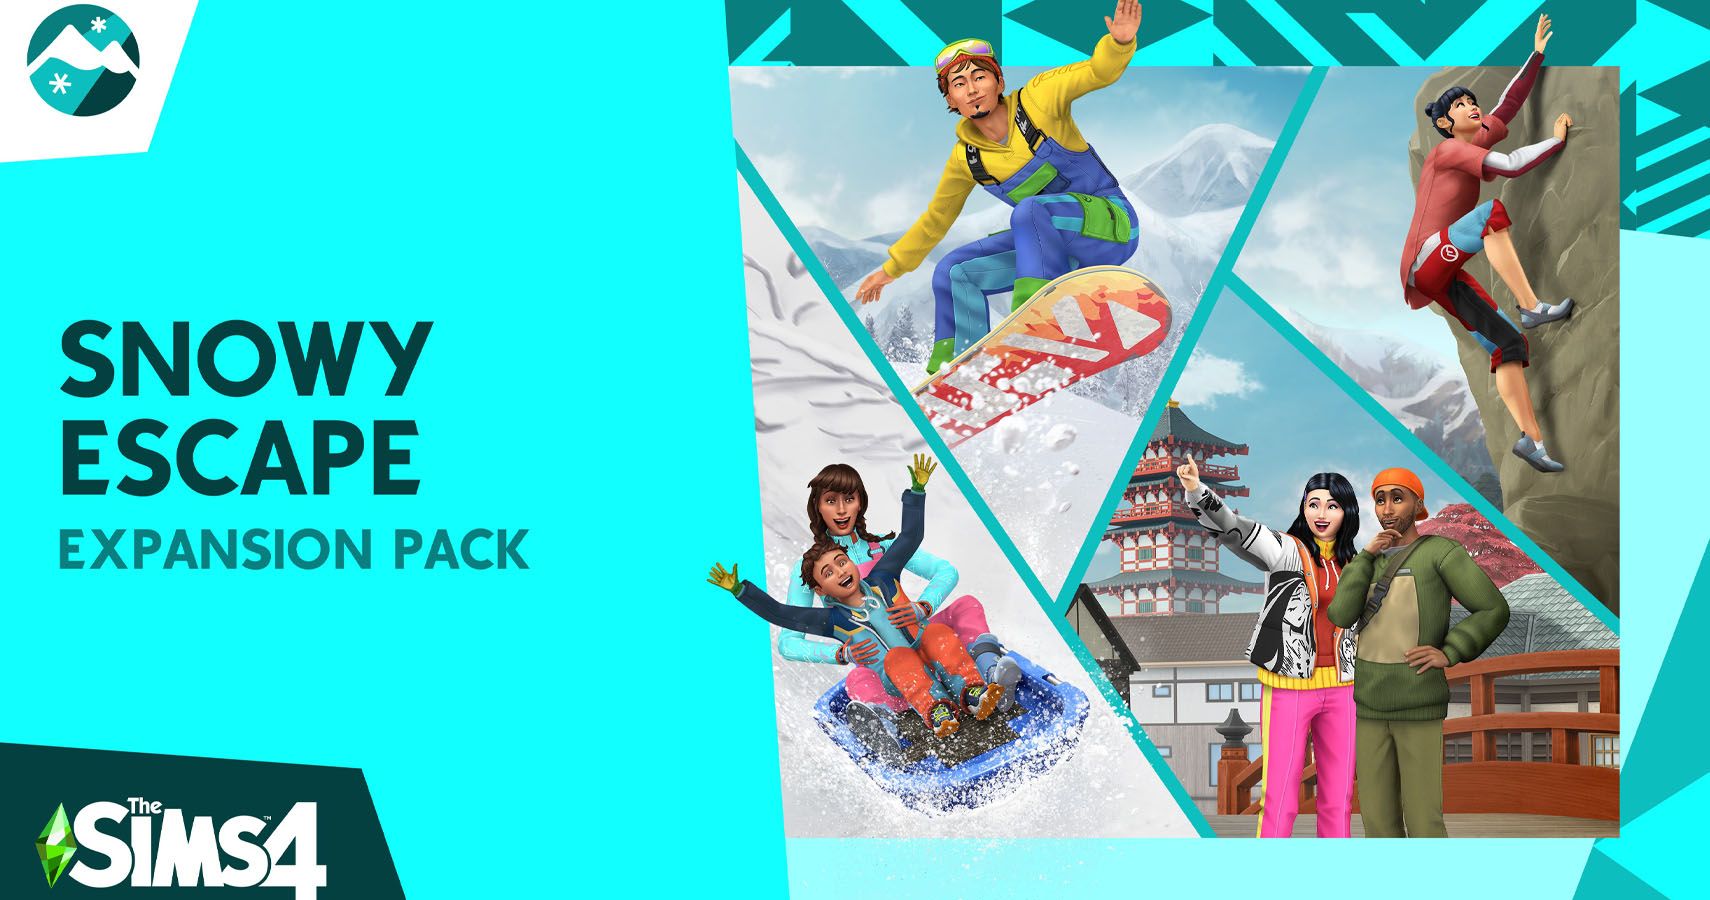 snow escape pack art with snowboarder, sledding, climbing and a pagoda.